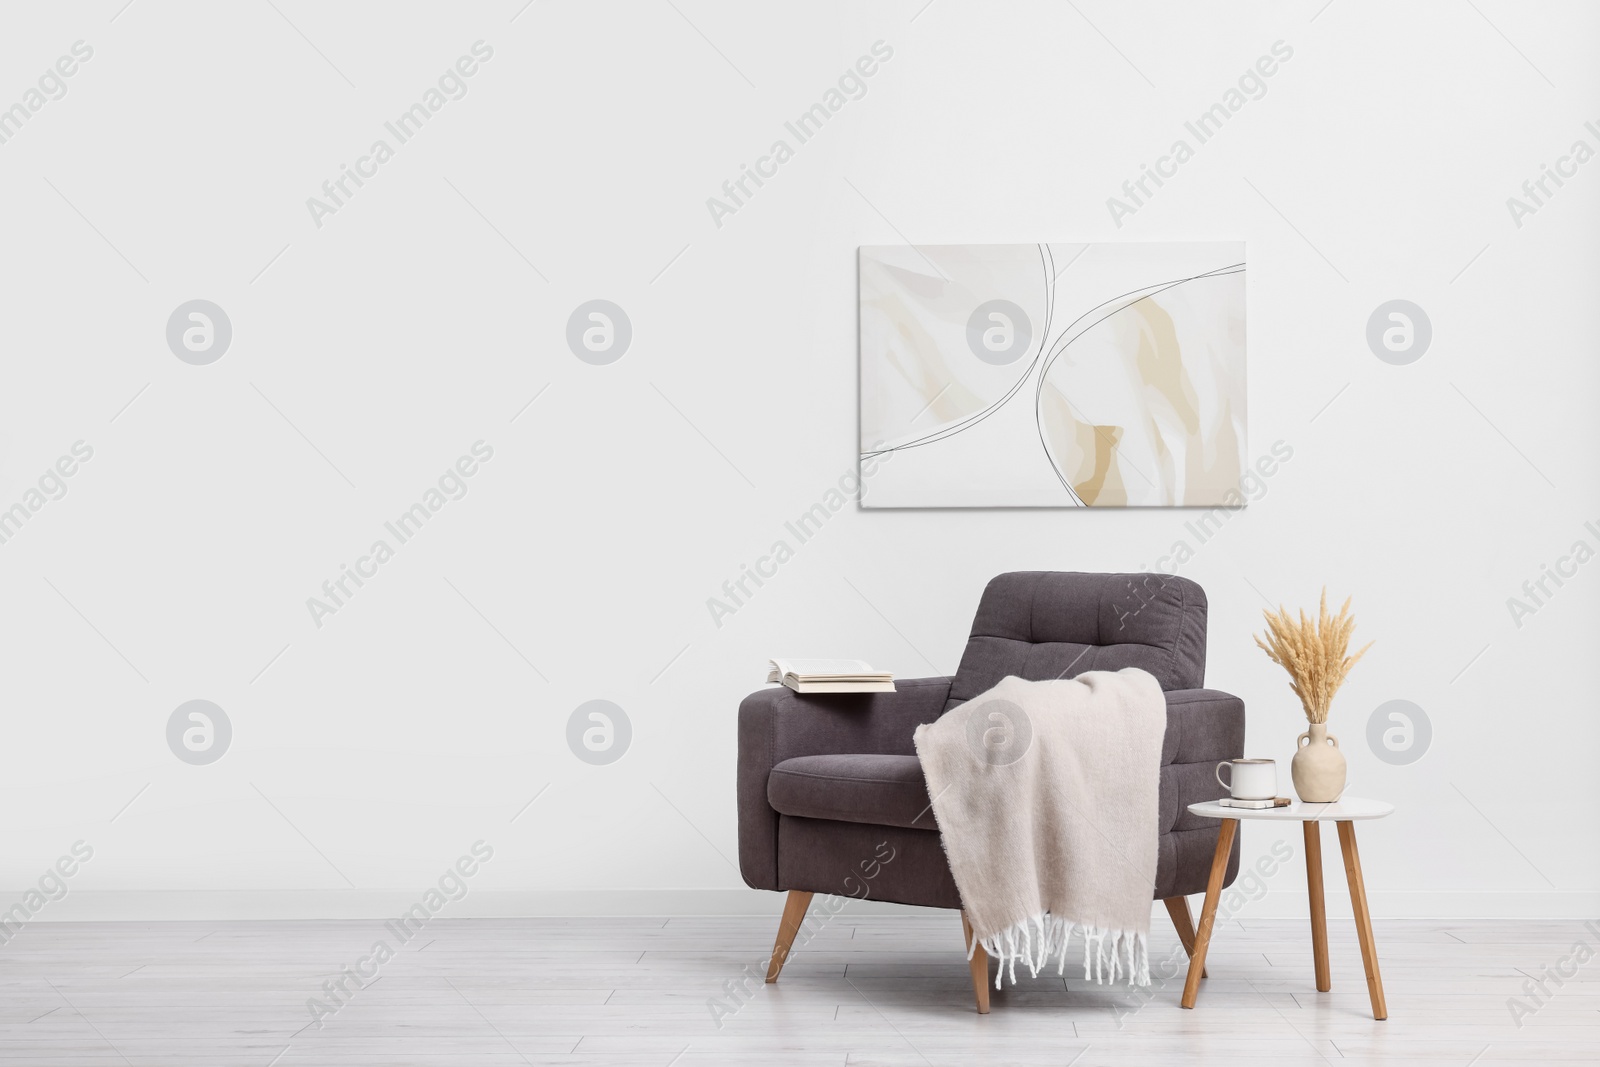 Photo of Comfortable armchair, blanket and side table near white wall indoors. Space for text